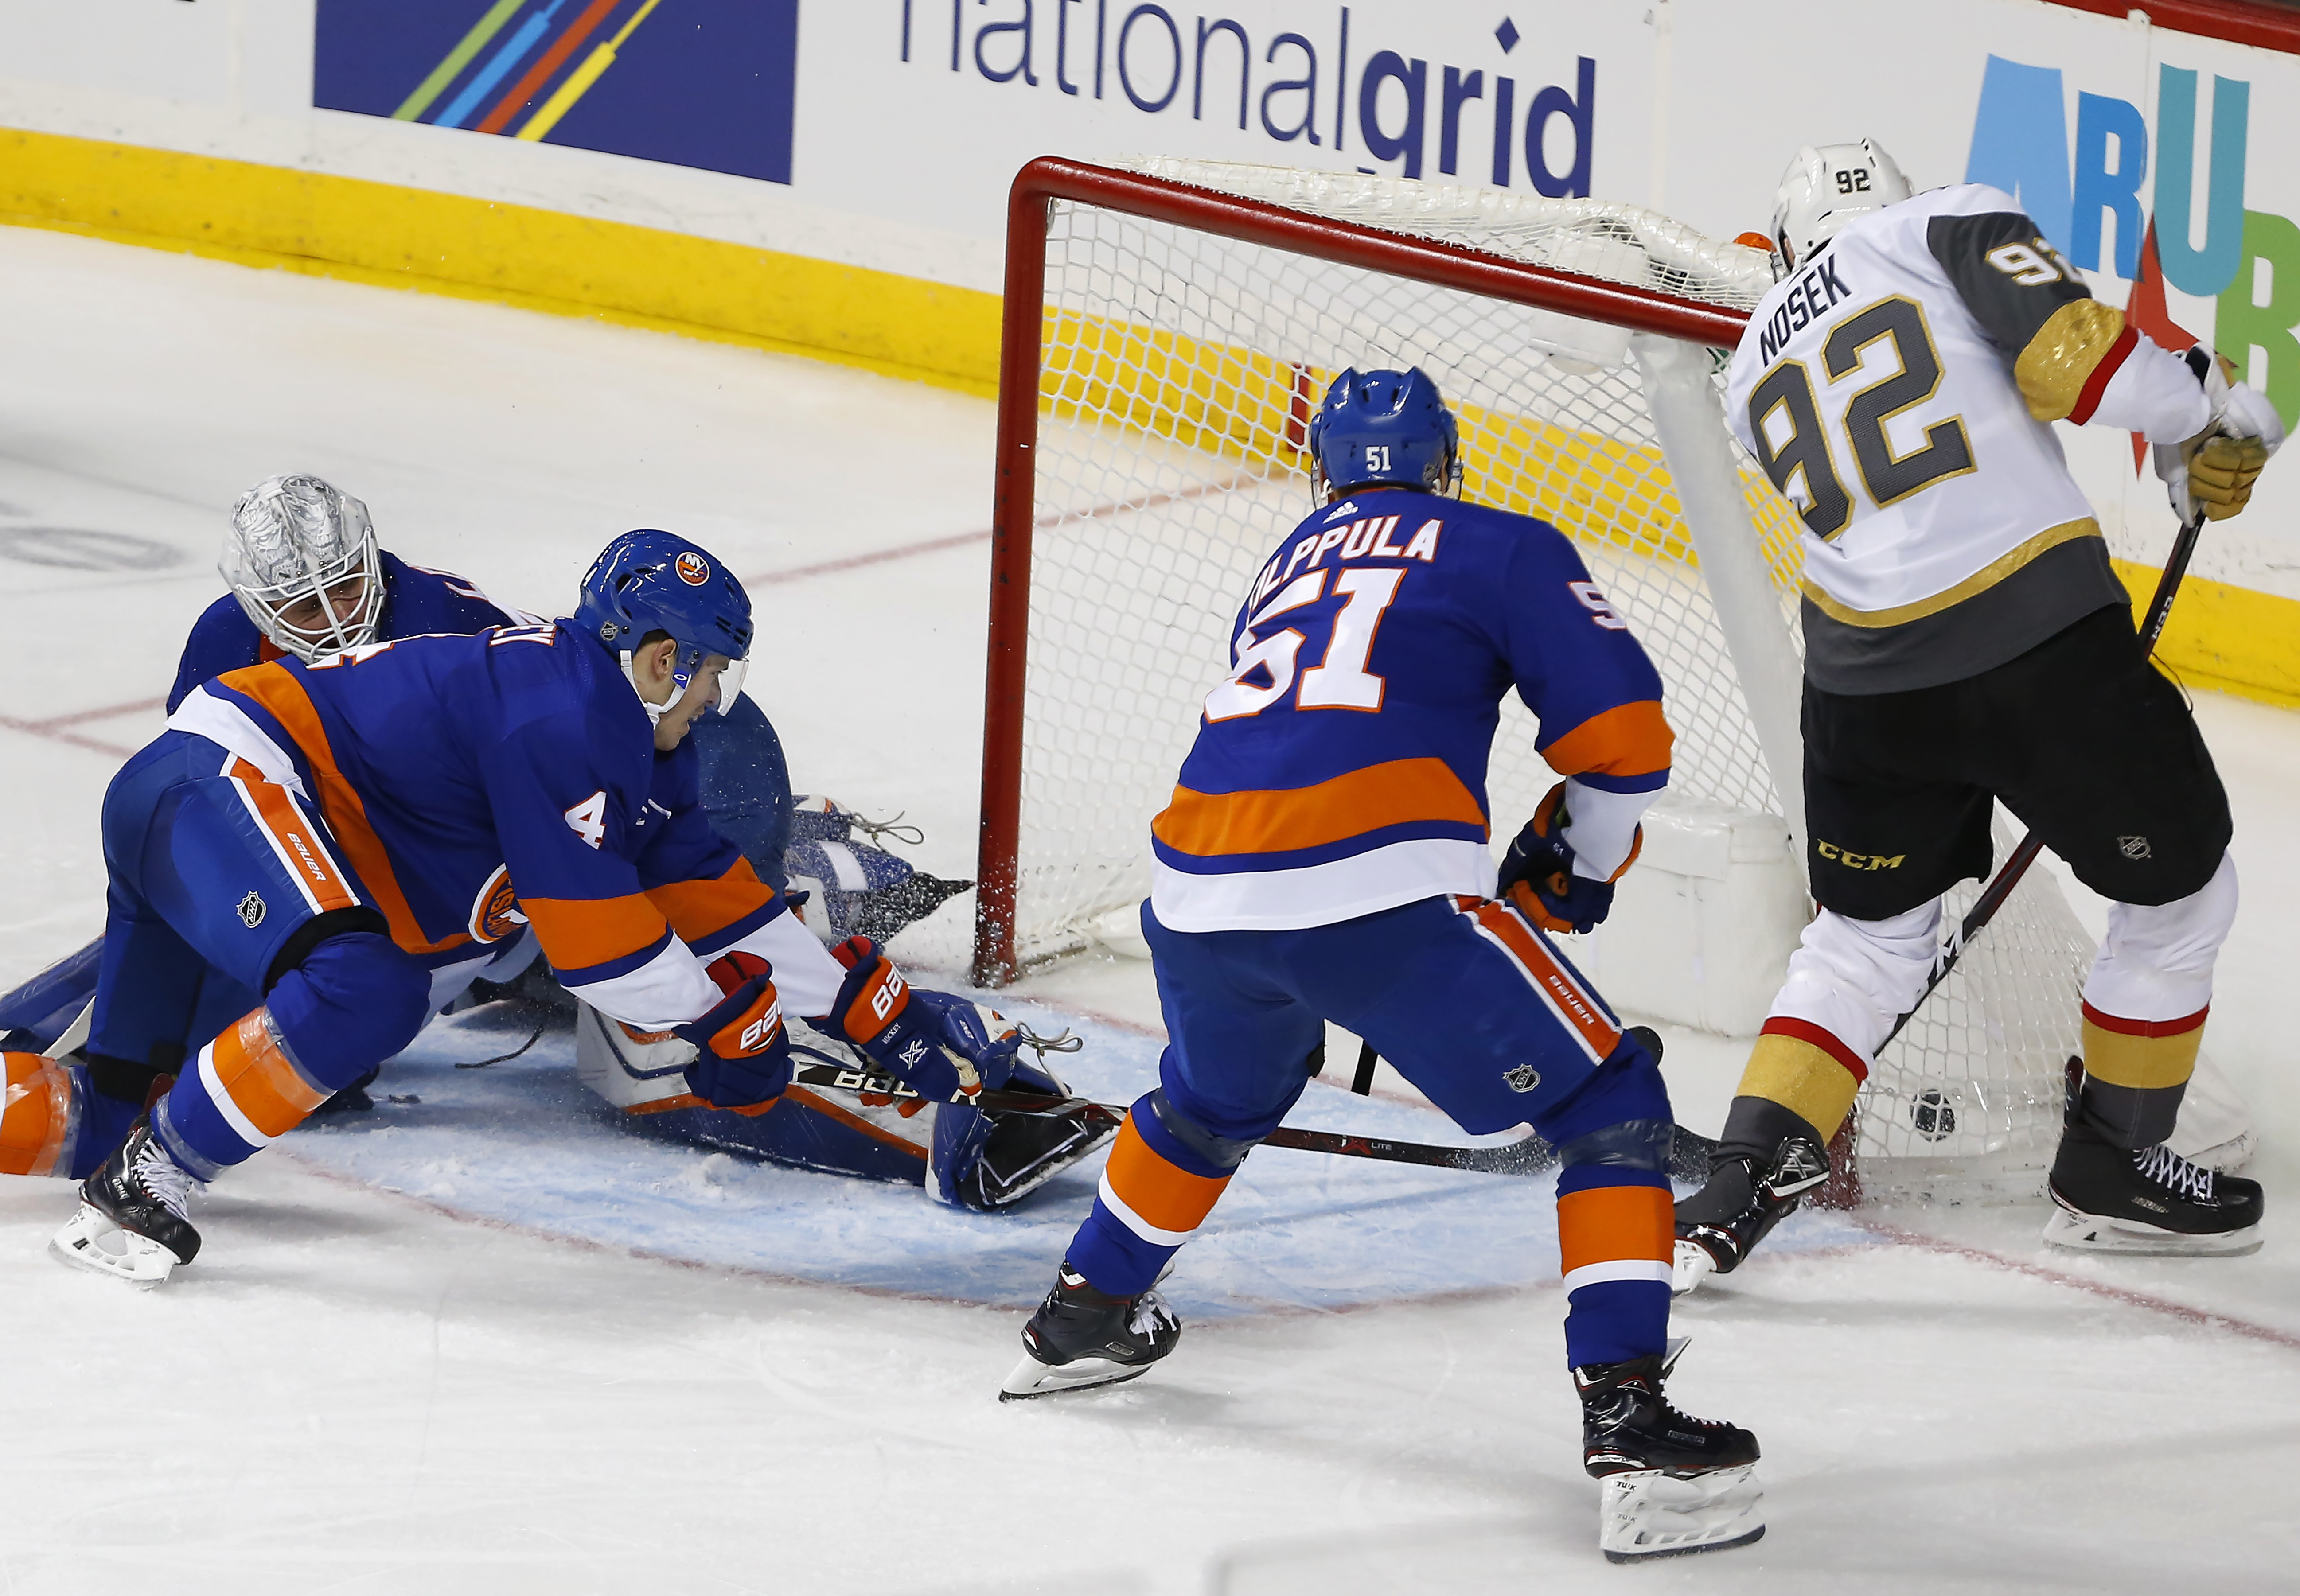 Vegas winger Tomas Nosek takes advantage of a loose puck in front of the net Wednesday night at Downtown’s Barclays Center, stuffing home the decisive goal in the Islanders’ 3-2 loss to the Golden Knights. AP Photo by Noah K. Murray